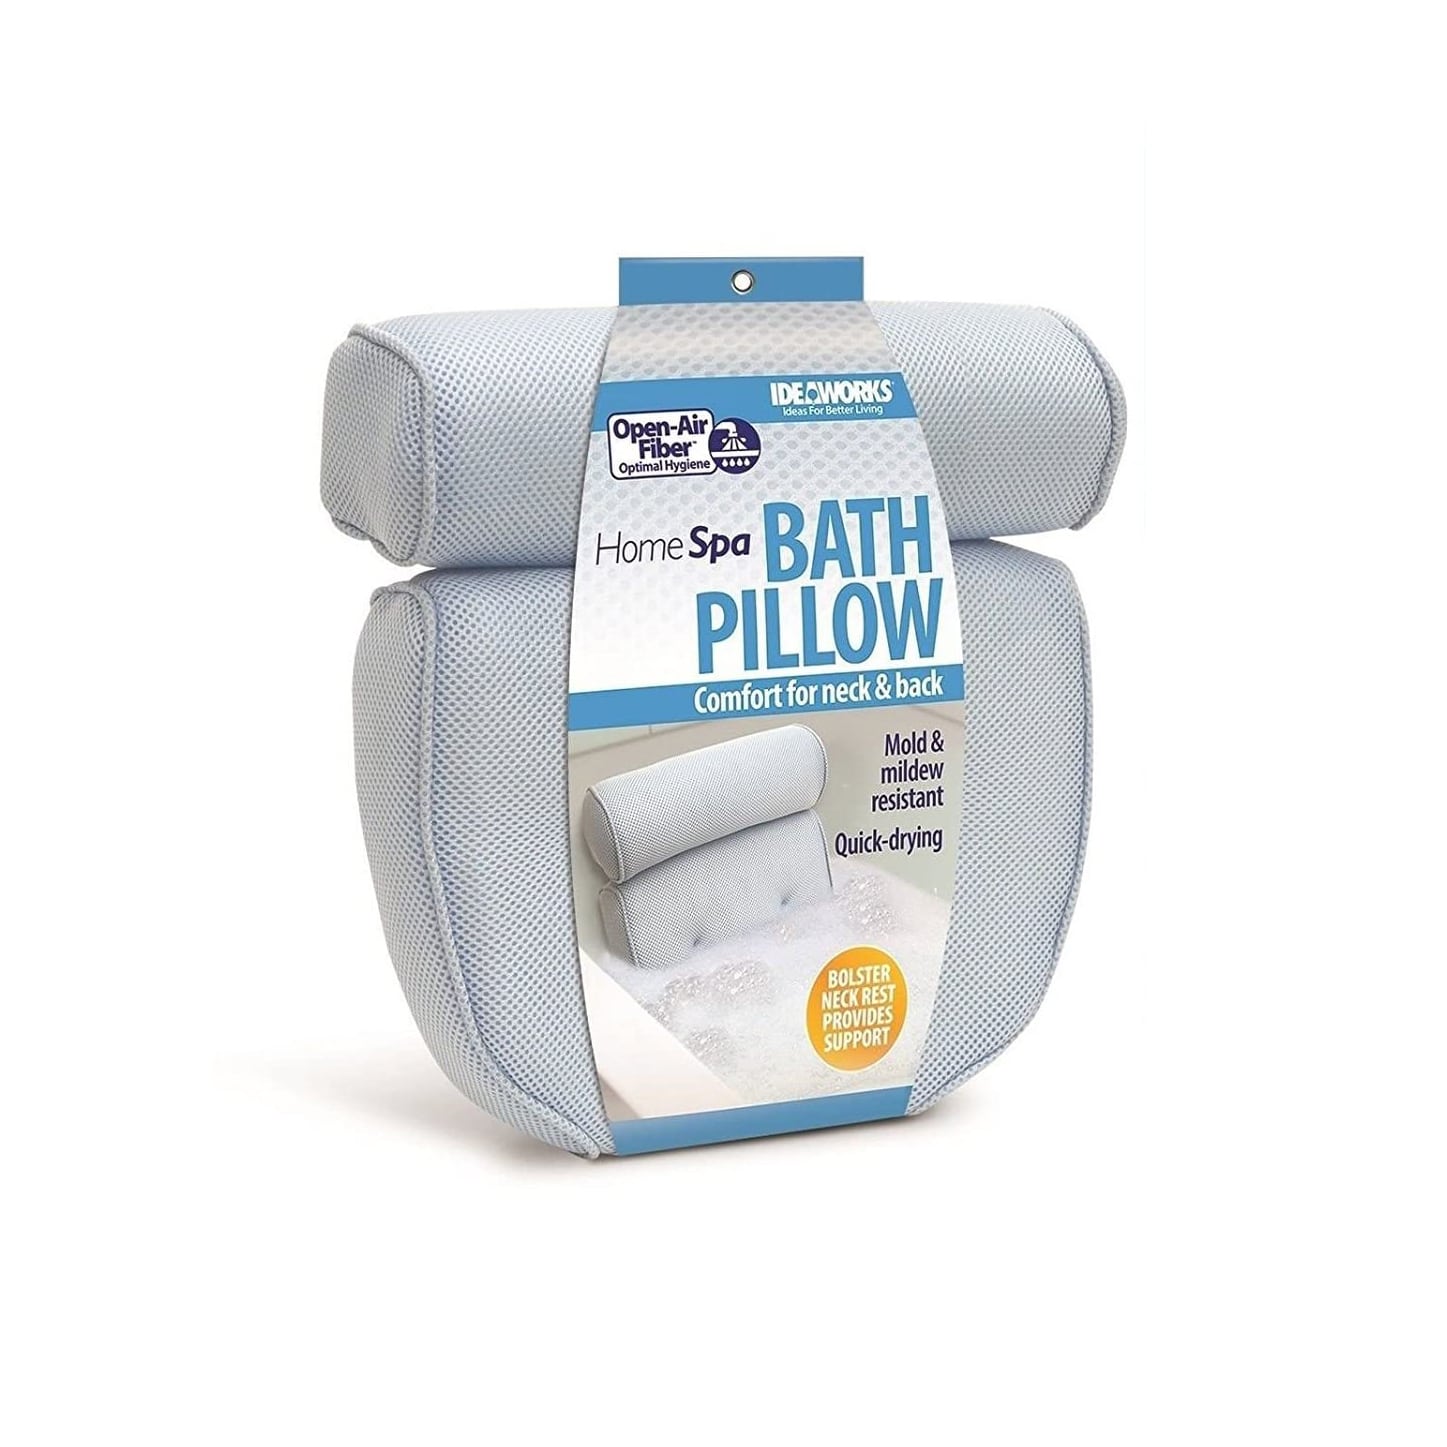 Top 10 Best Bath Pillows In 2021 Reviews Buying Guide 